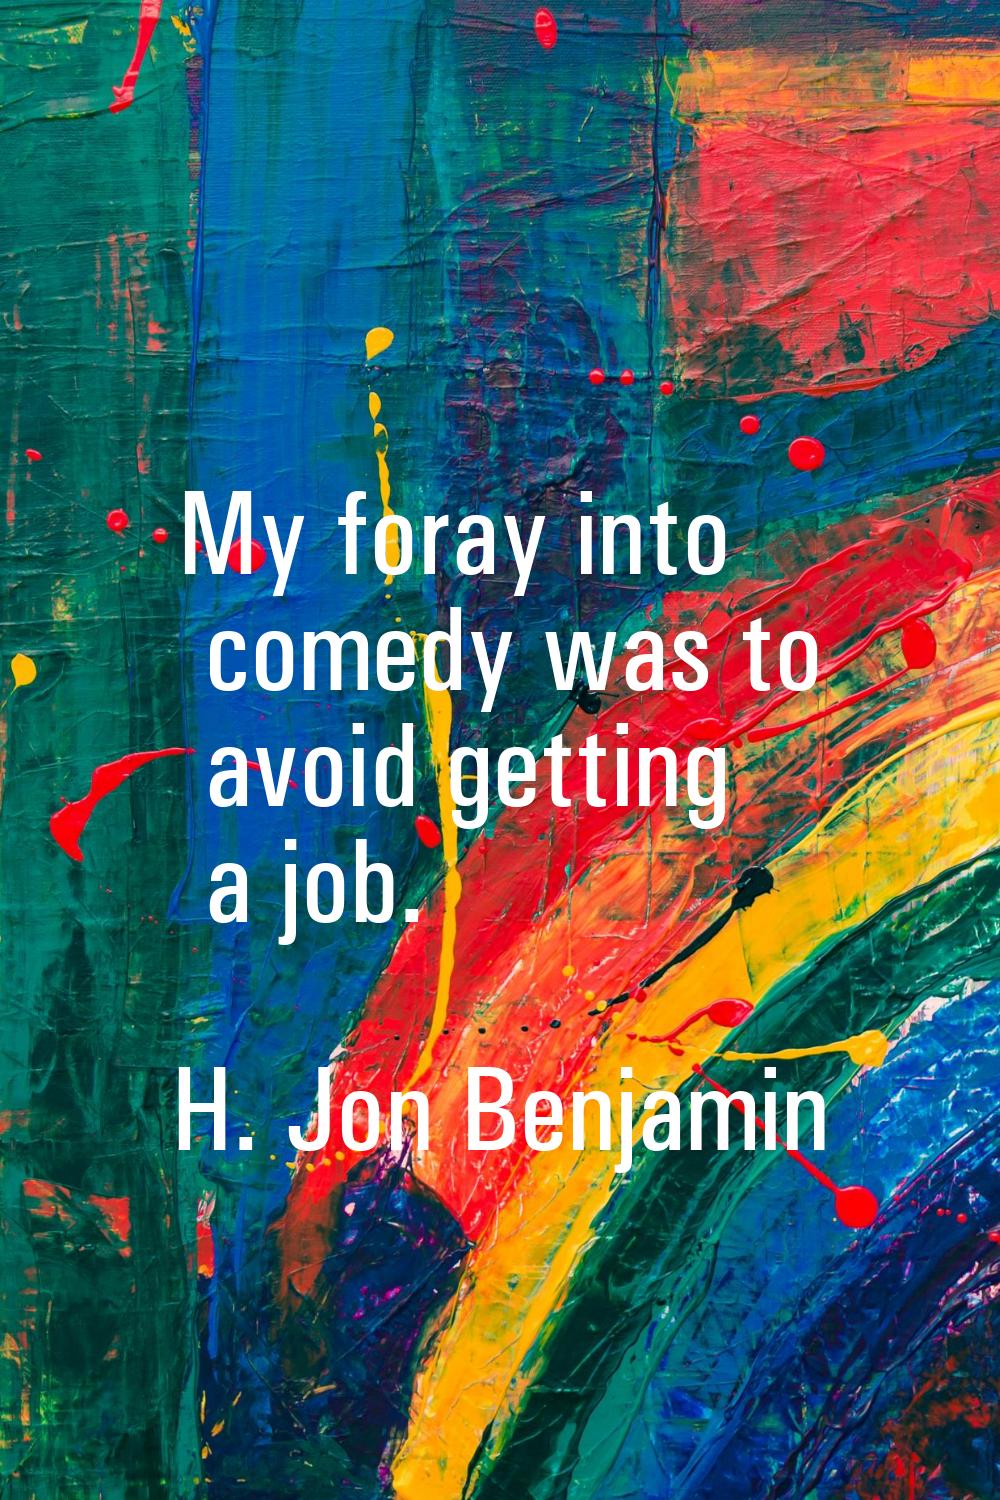 My foray into comedy was to avoid getting a job.